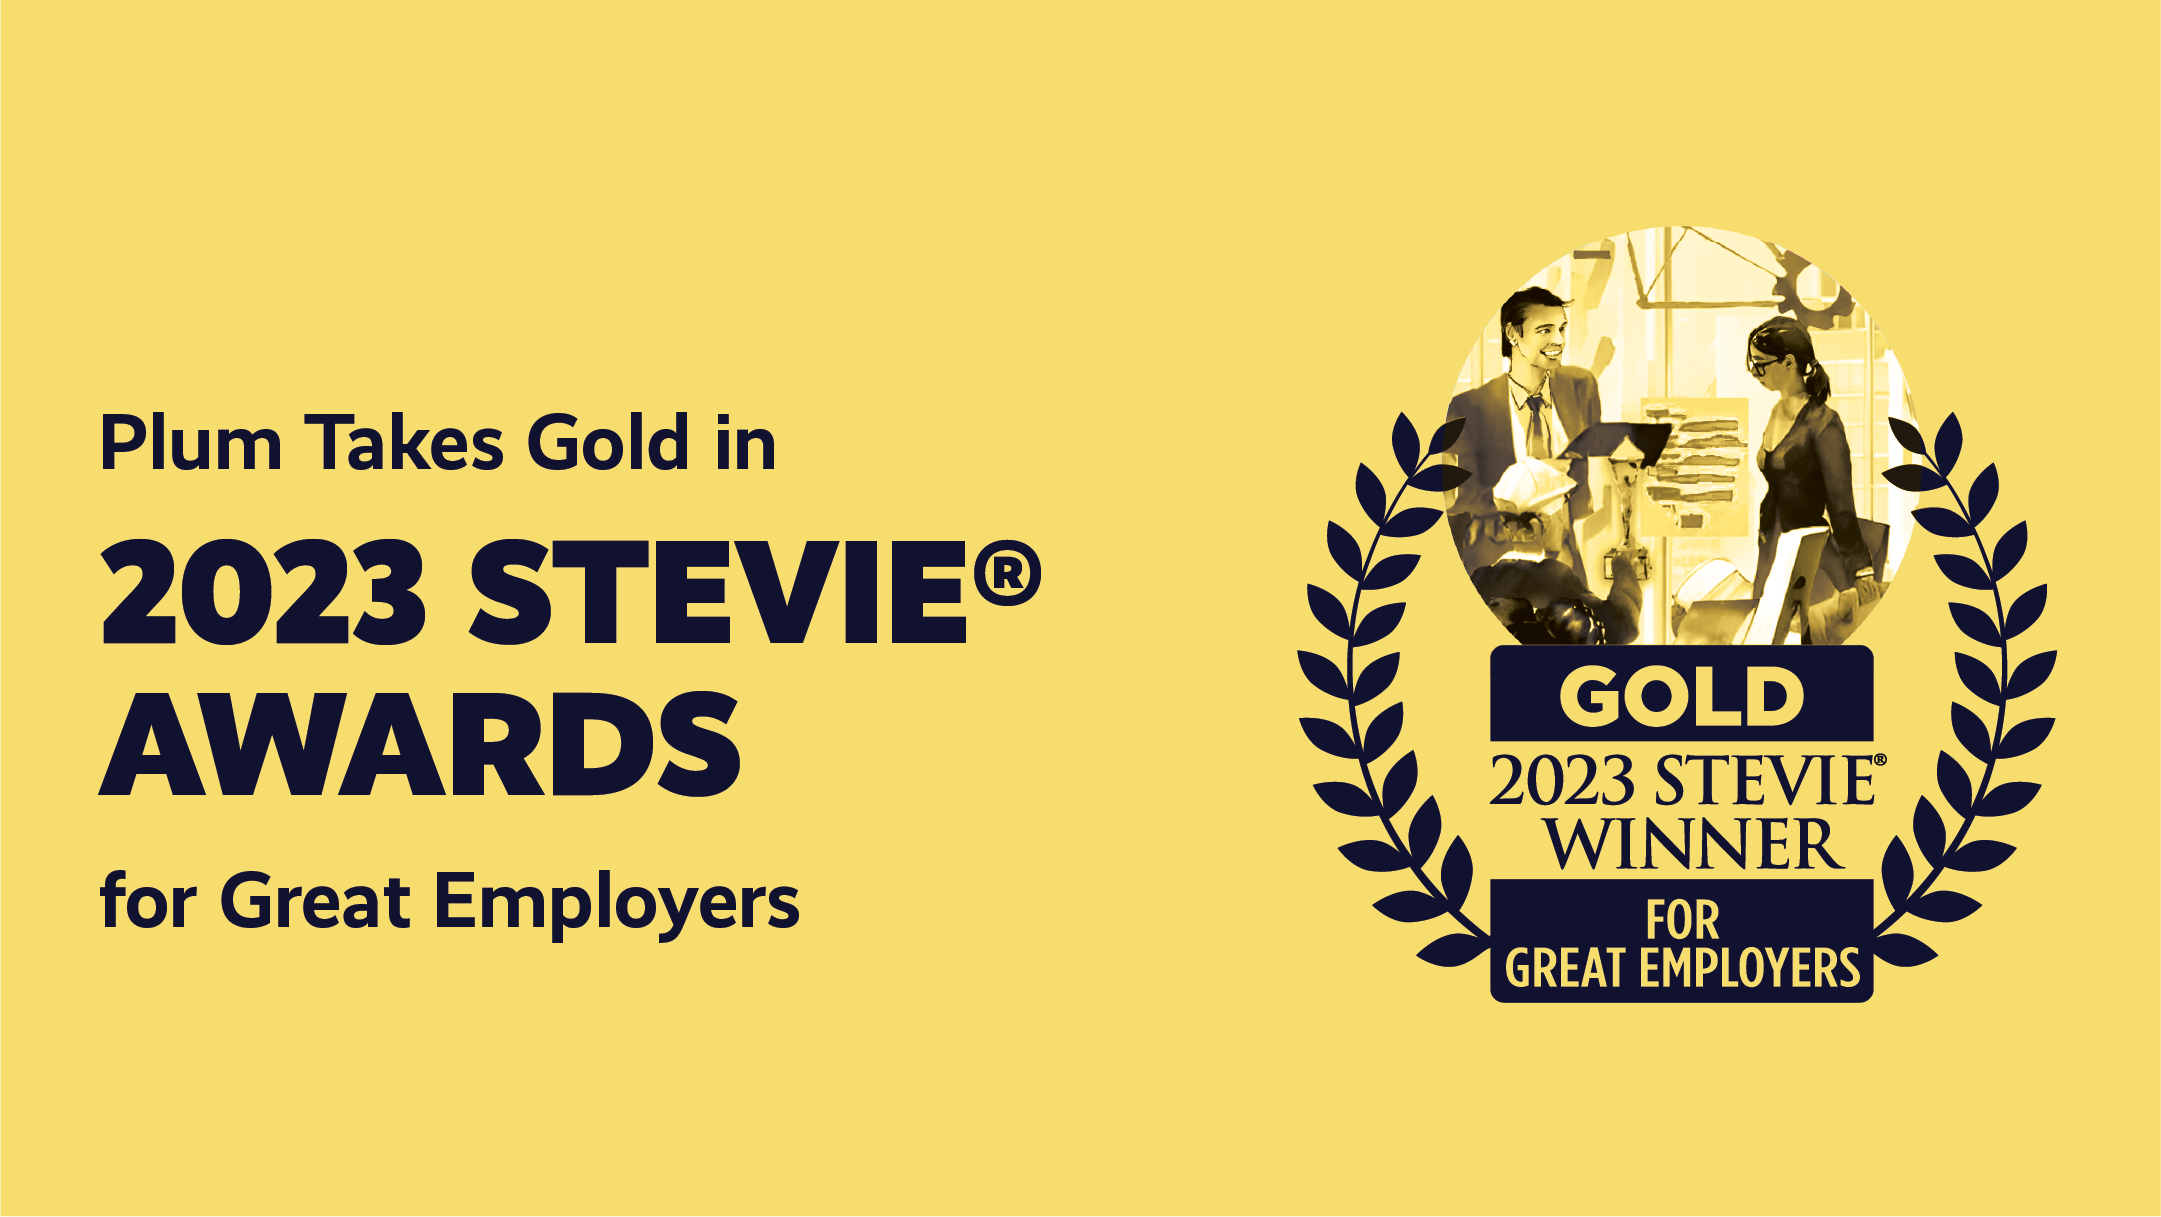 Plum Takes Gold in 2023 Stevie® Awards for Great Employers